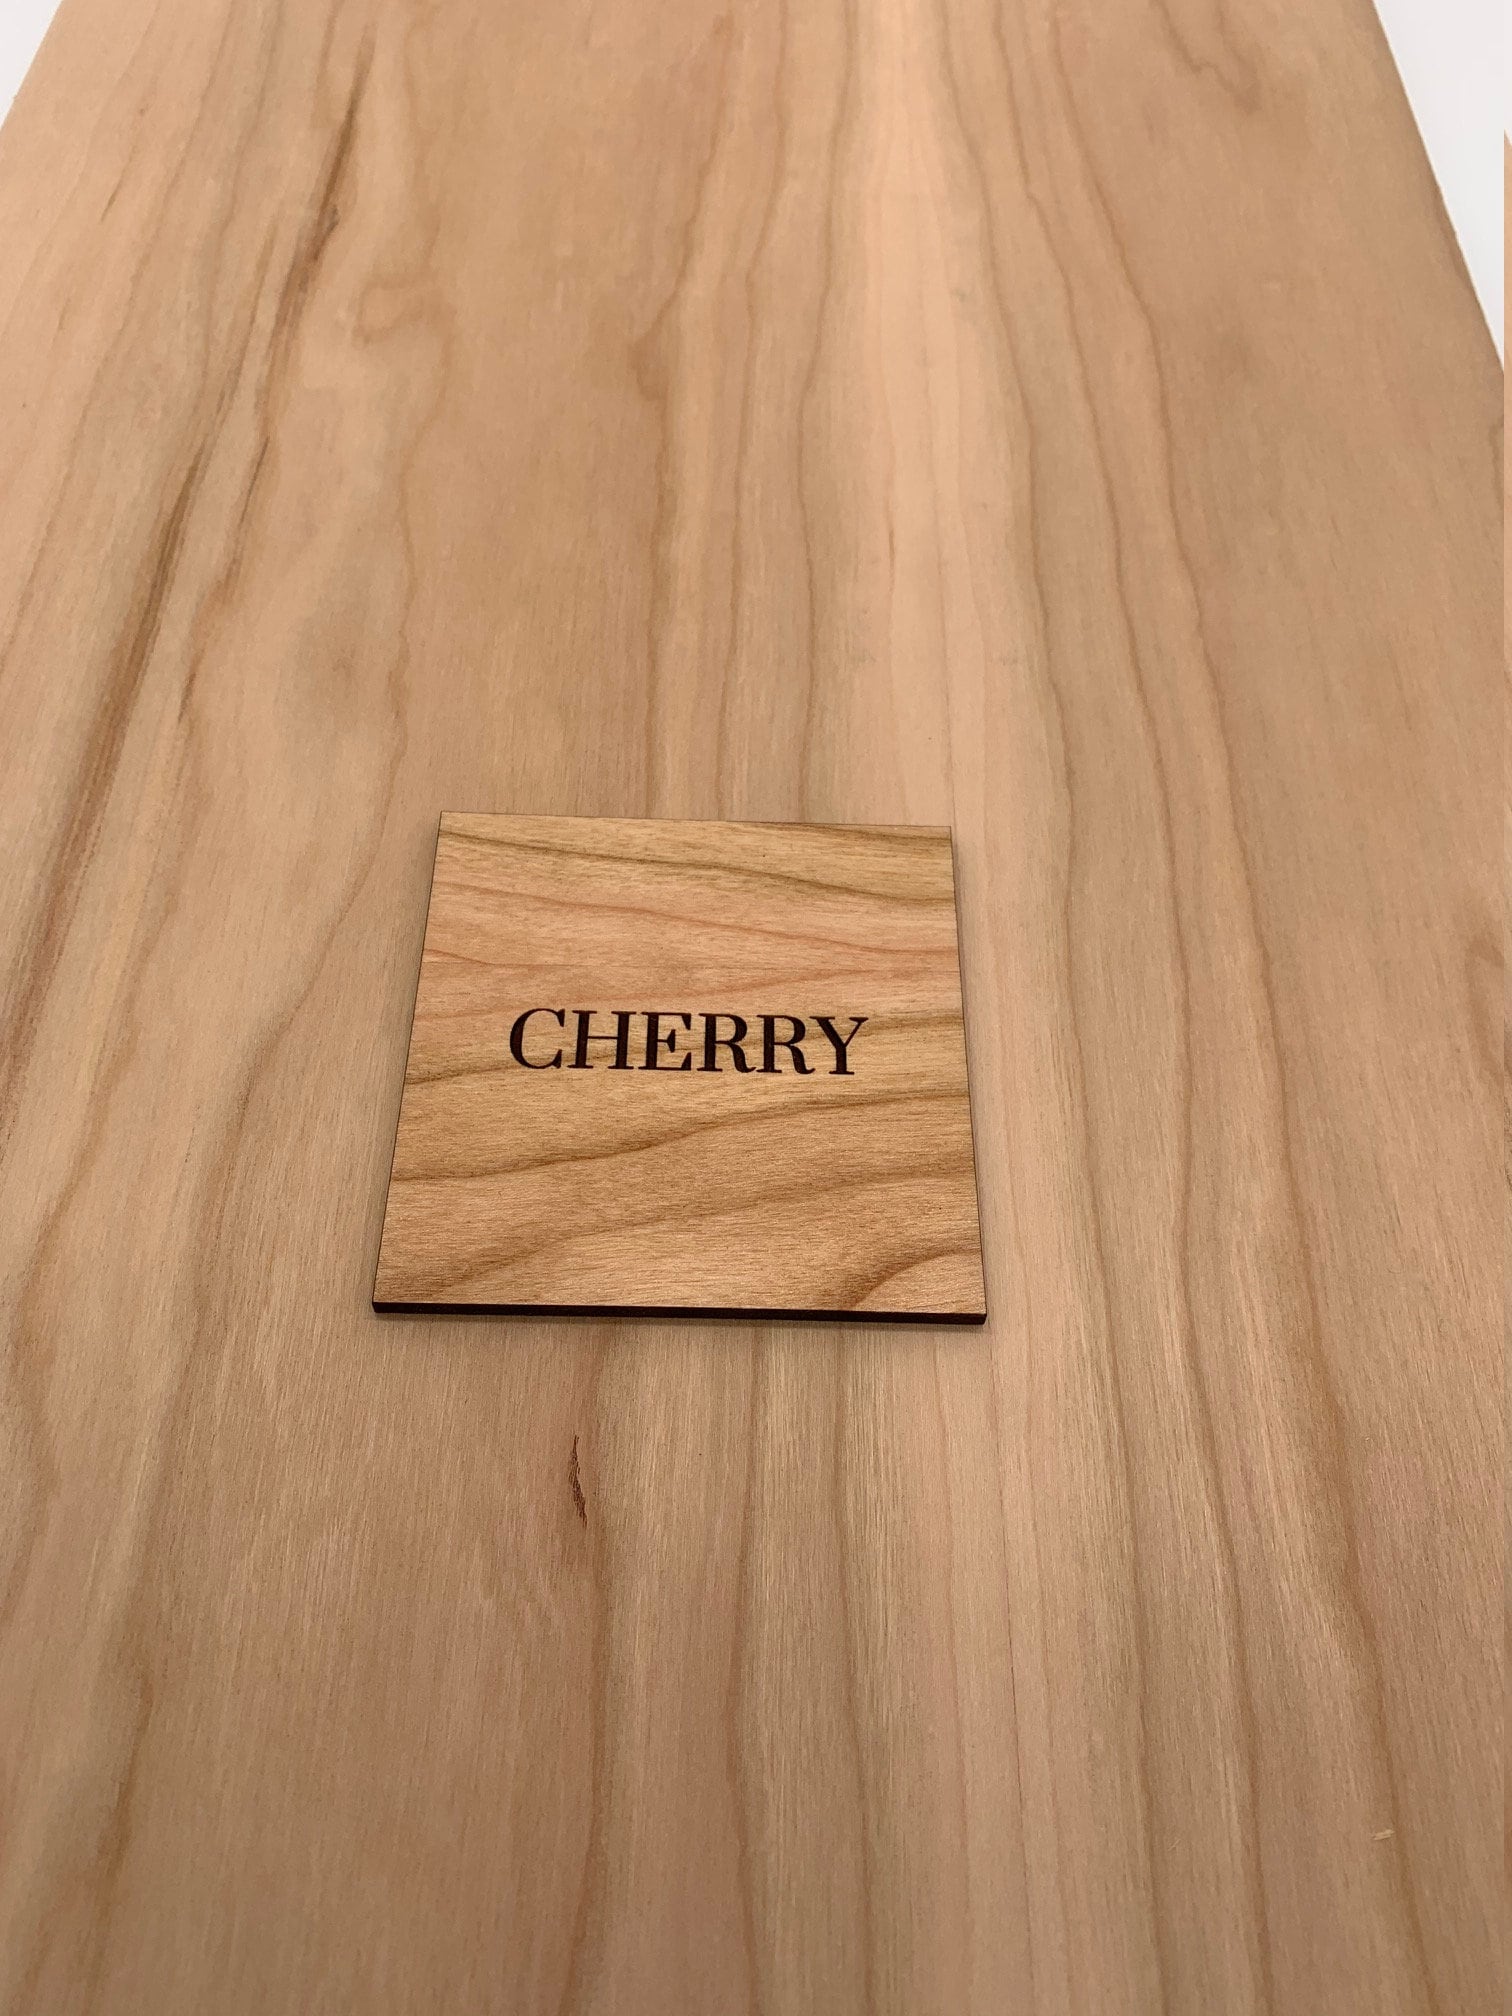 1/8 Cherry Plywood / Cherry wood for laser cutters – Laser Wood Supplies